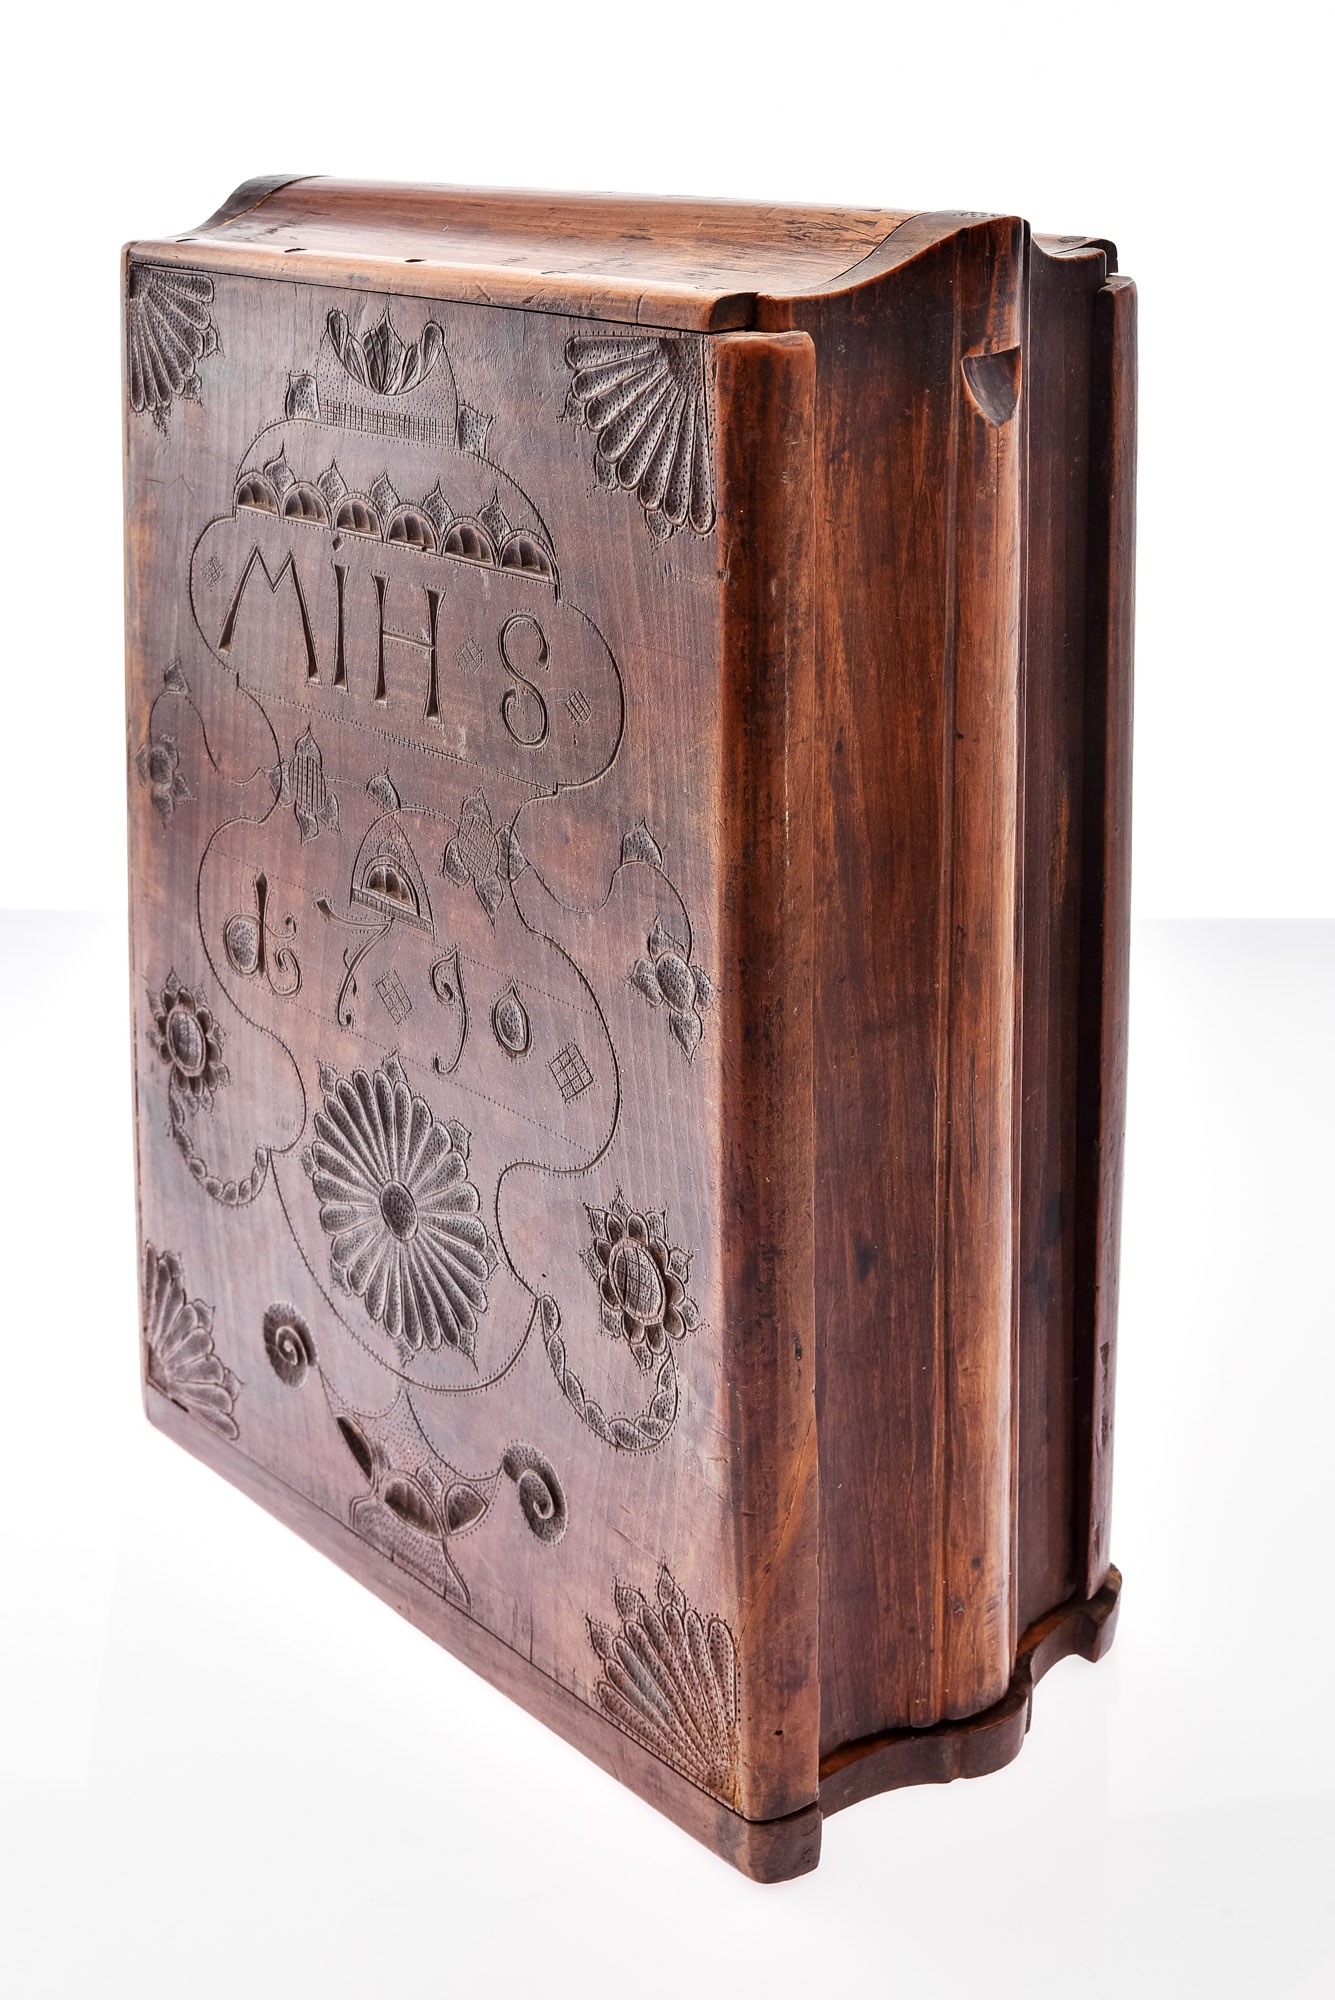 Volume - Book case, probably Swiss, dated 1790. With monogram 'MIH S'. Cherry wood. Front cover orn - Image 3 of 9